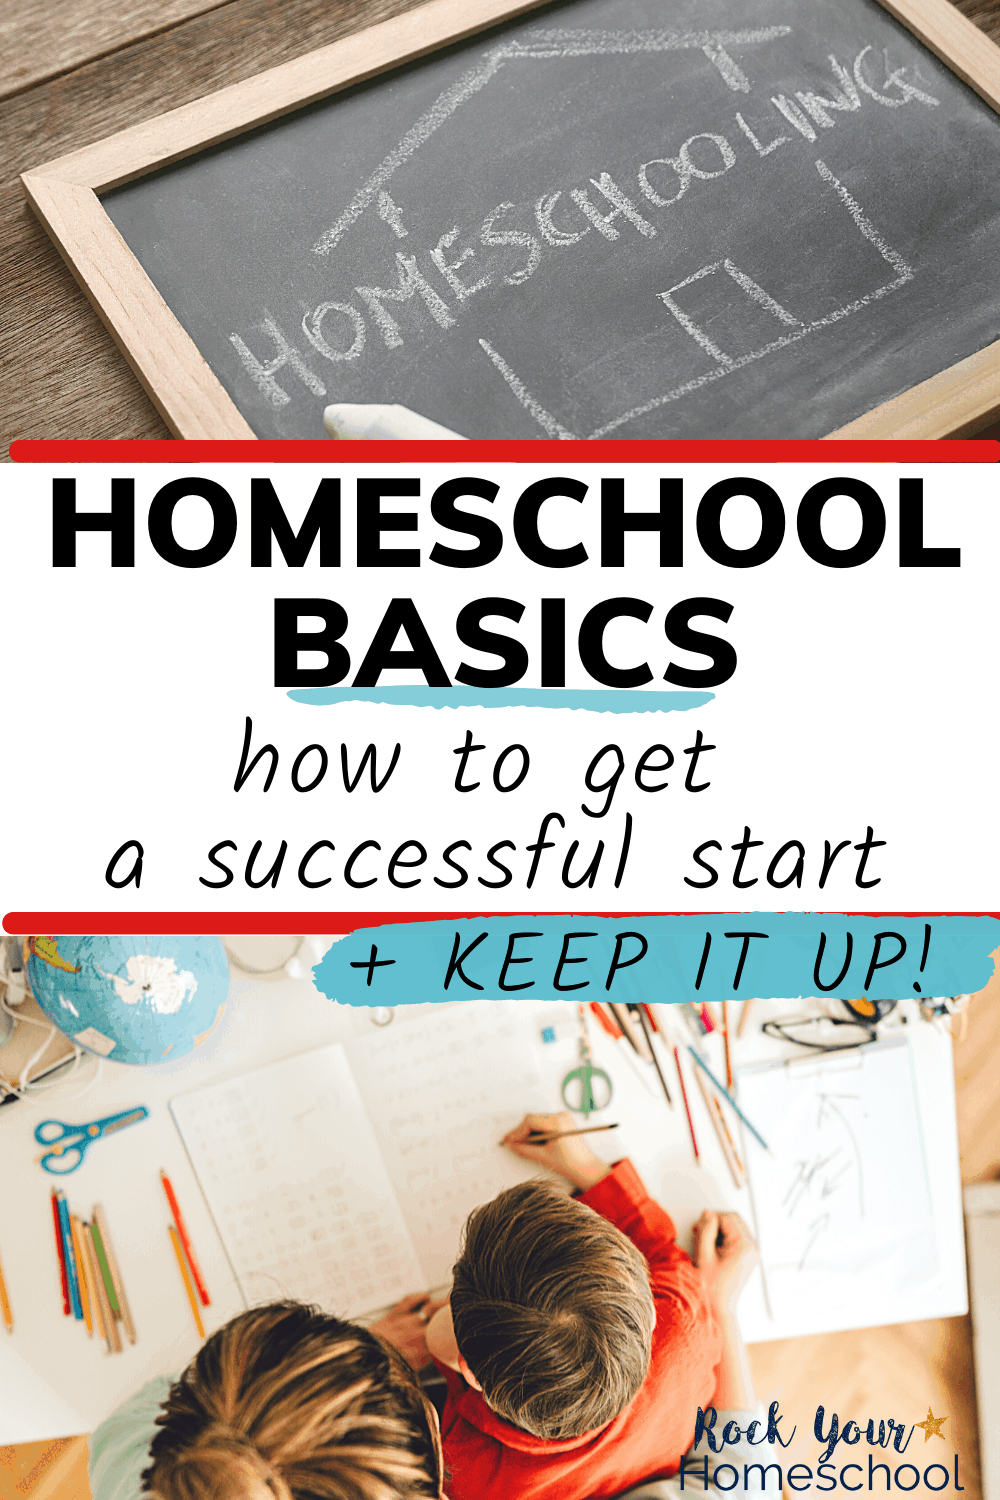 Homeschool Basics: How to Get a Successful Start and Keep It Up